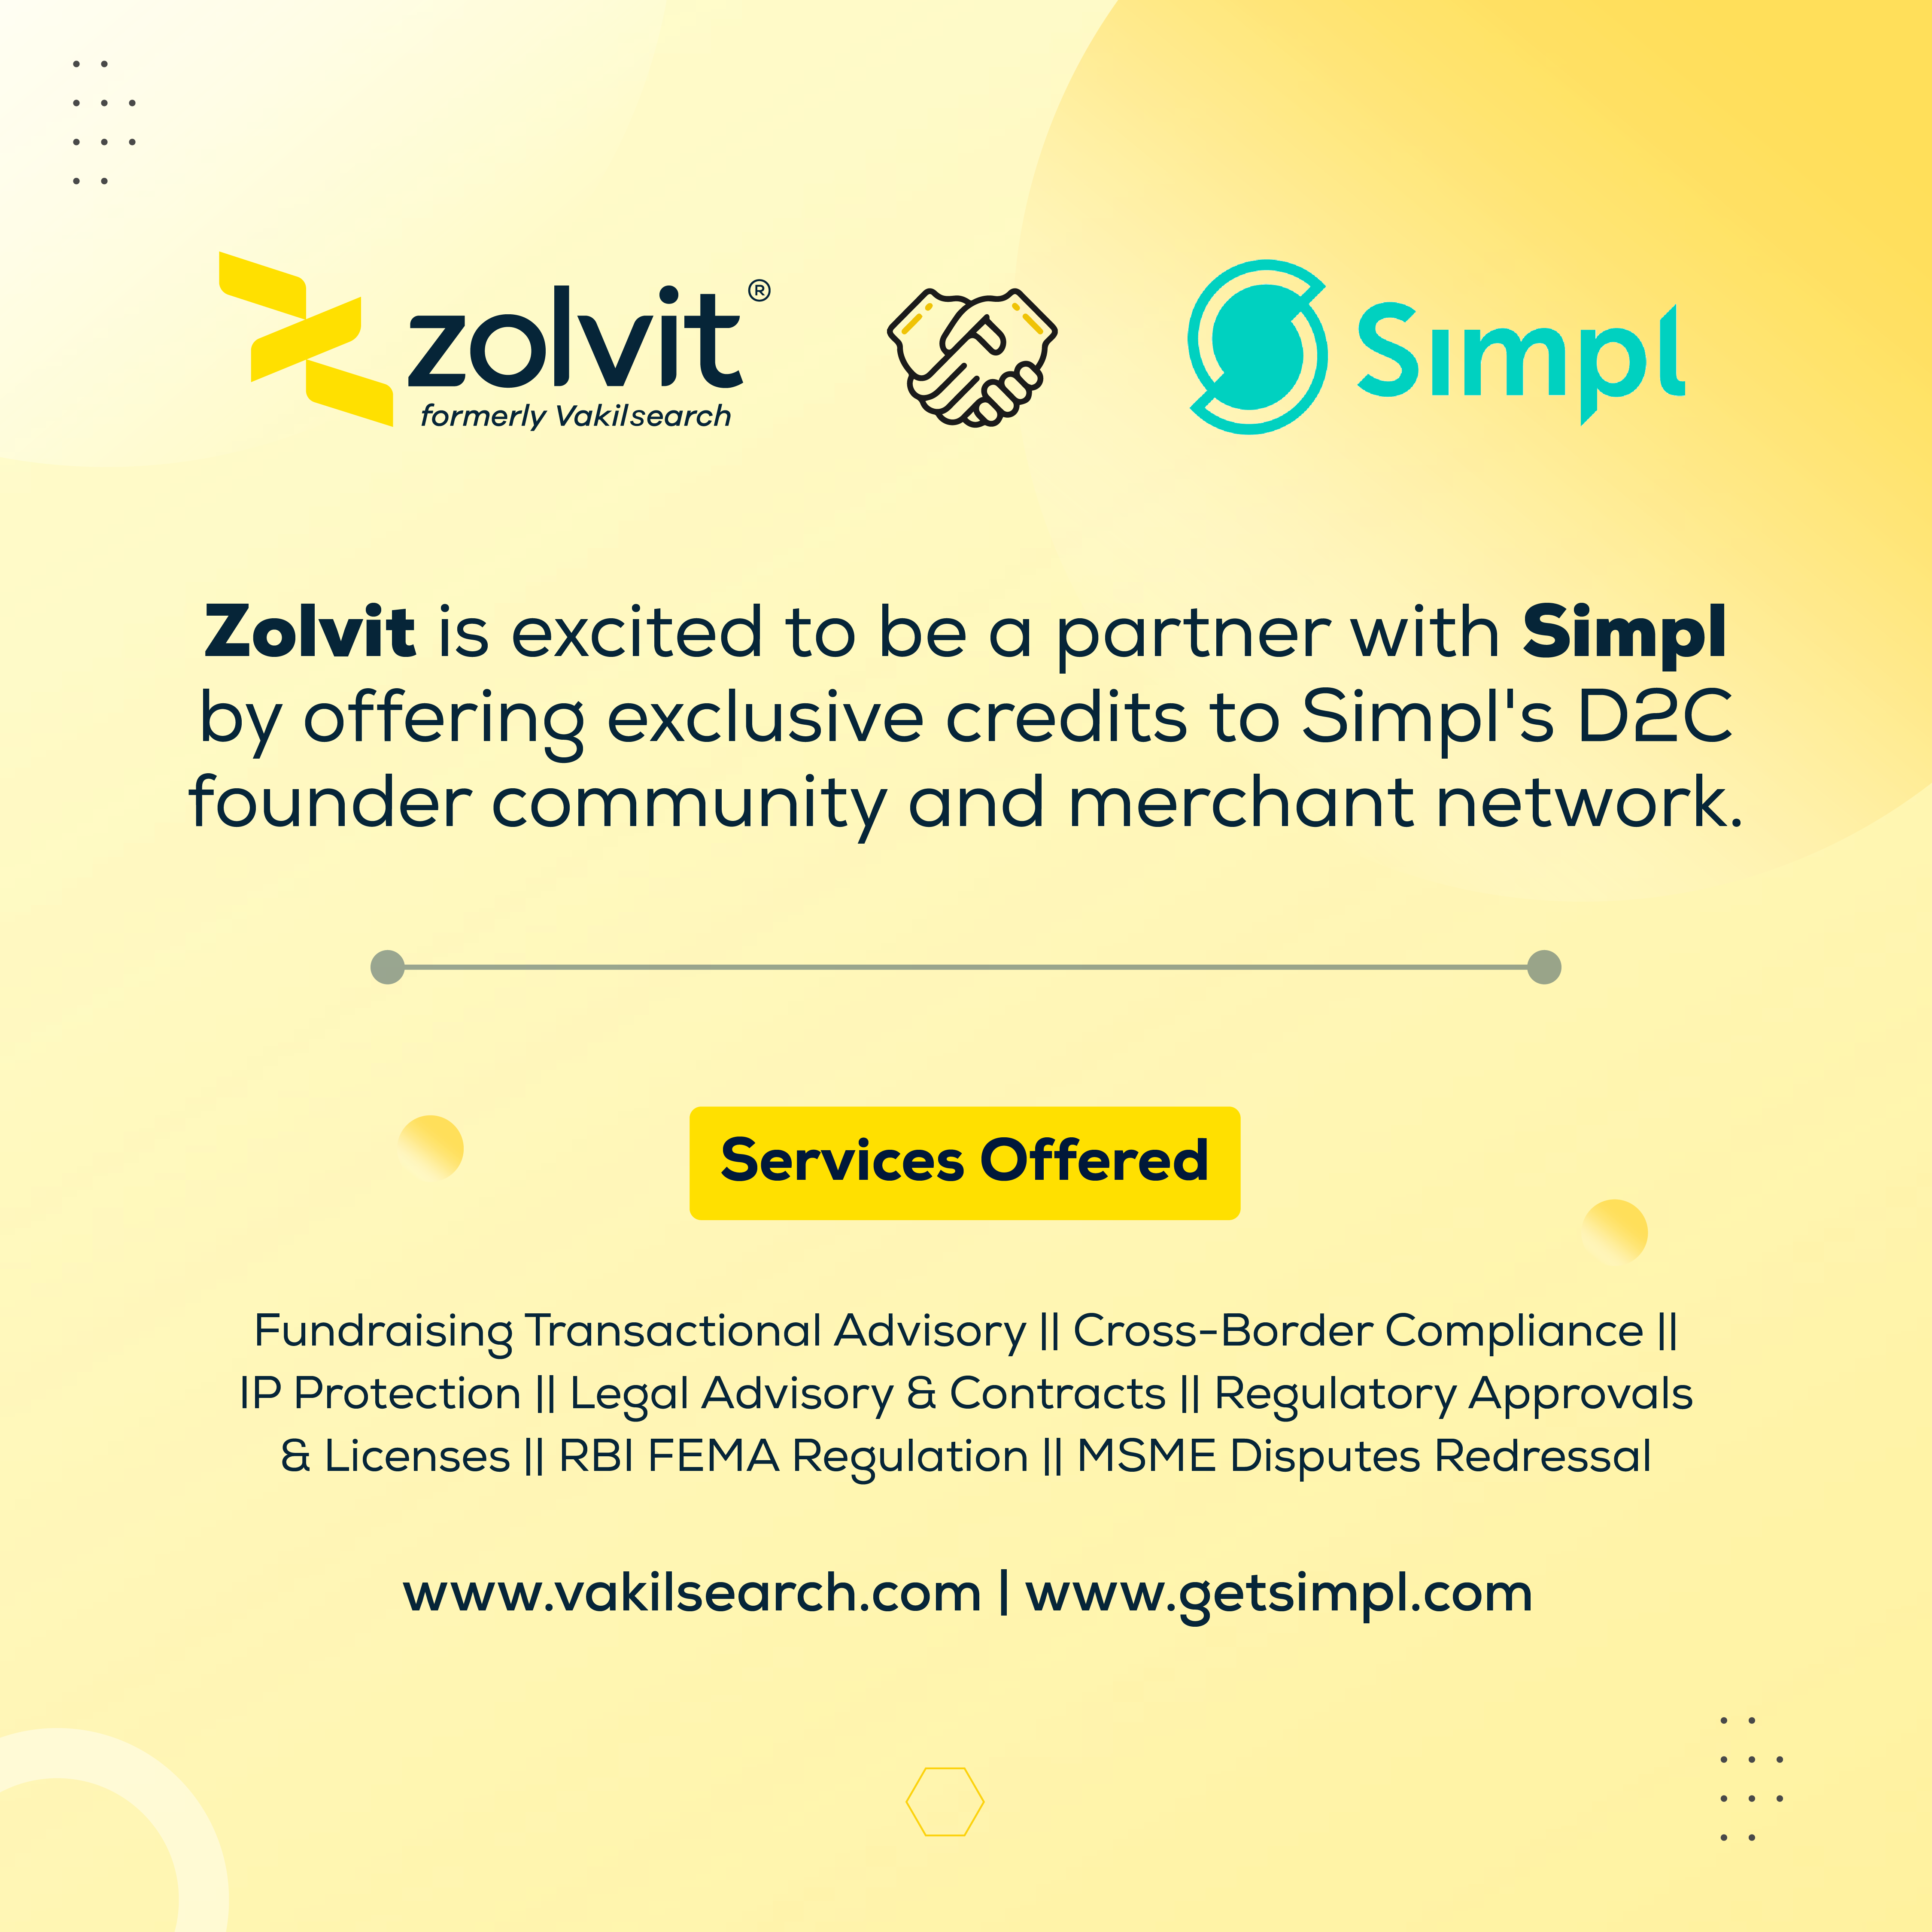 Simpl Partners with Zolvit to Offer Comprehensive Legal and Compliance Services for D2C Merchants Across India